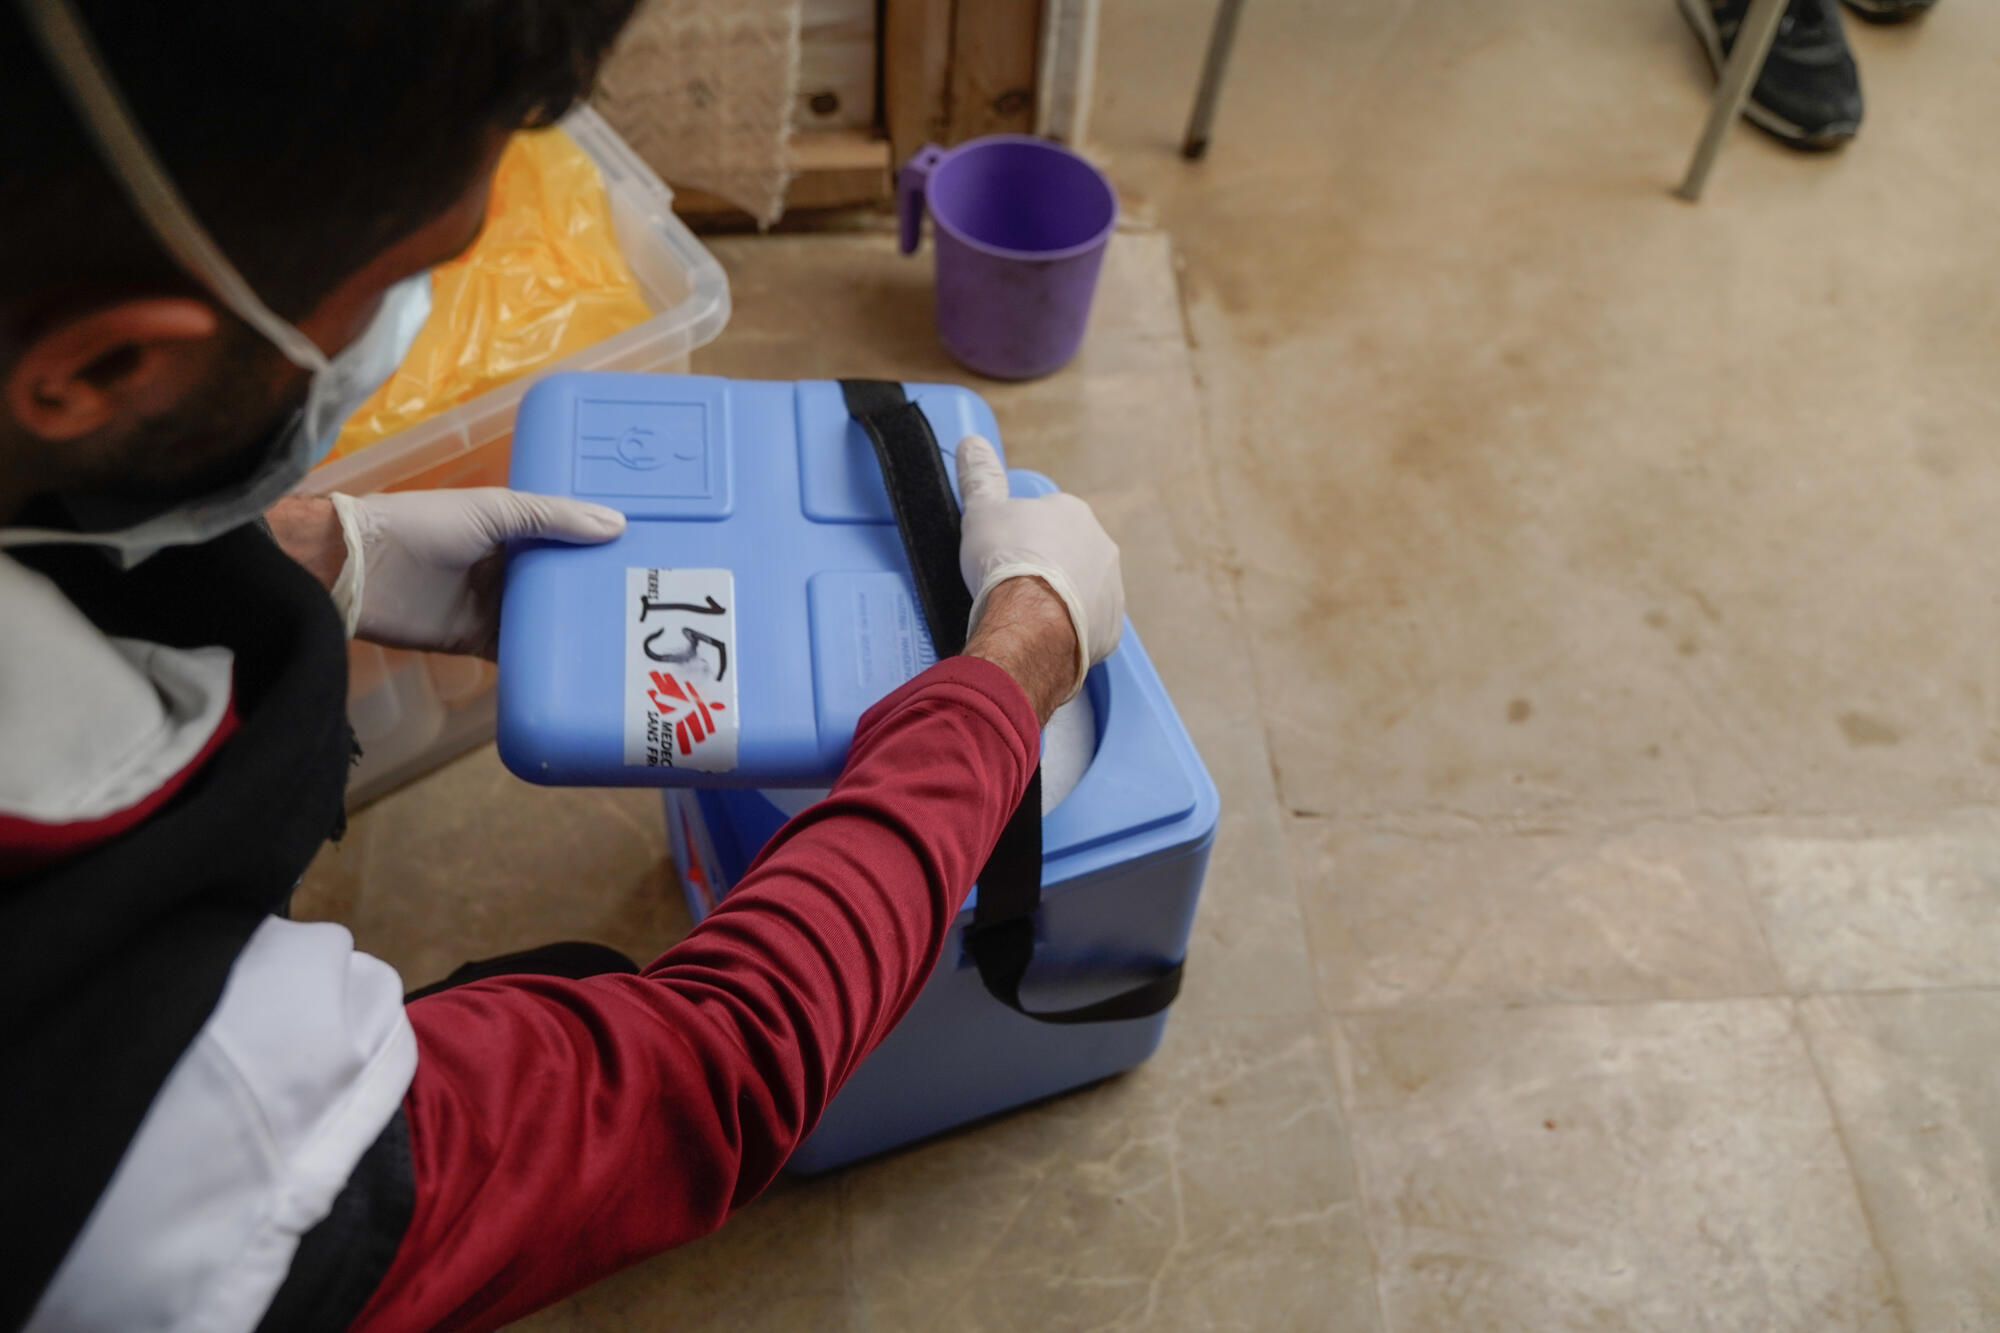 Access to vaccines and clean water essential as cholera spreads in Lebanon